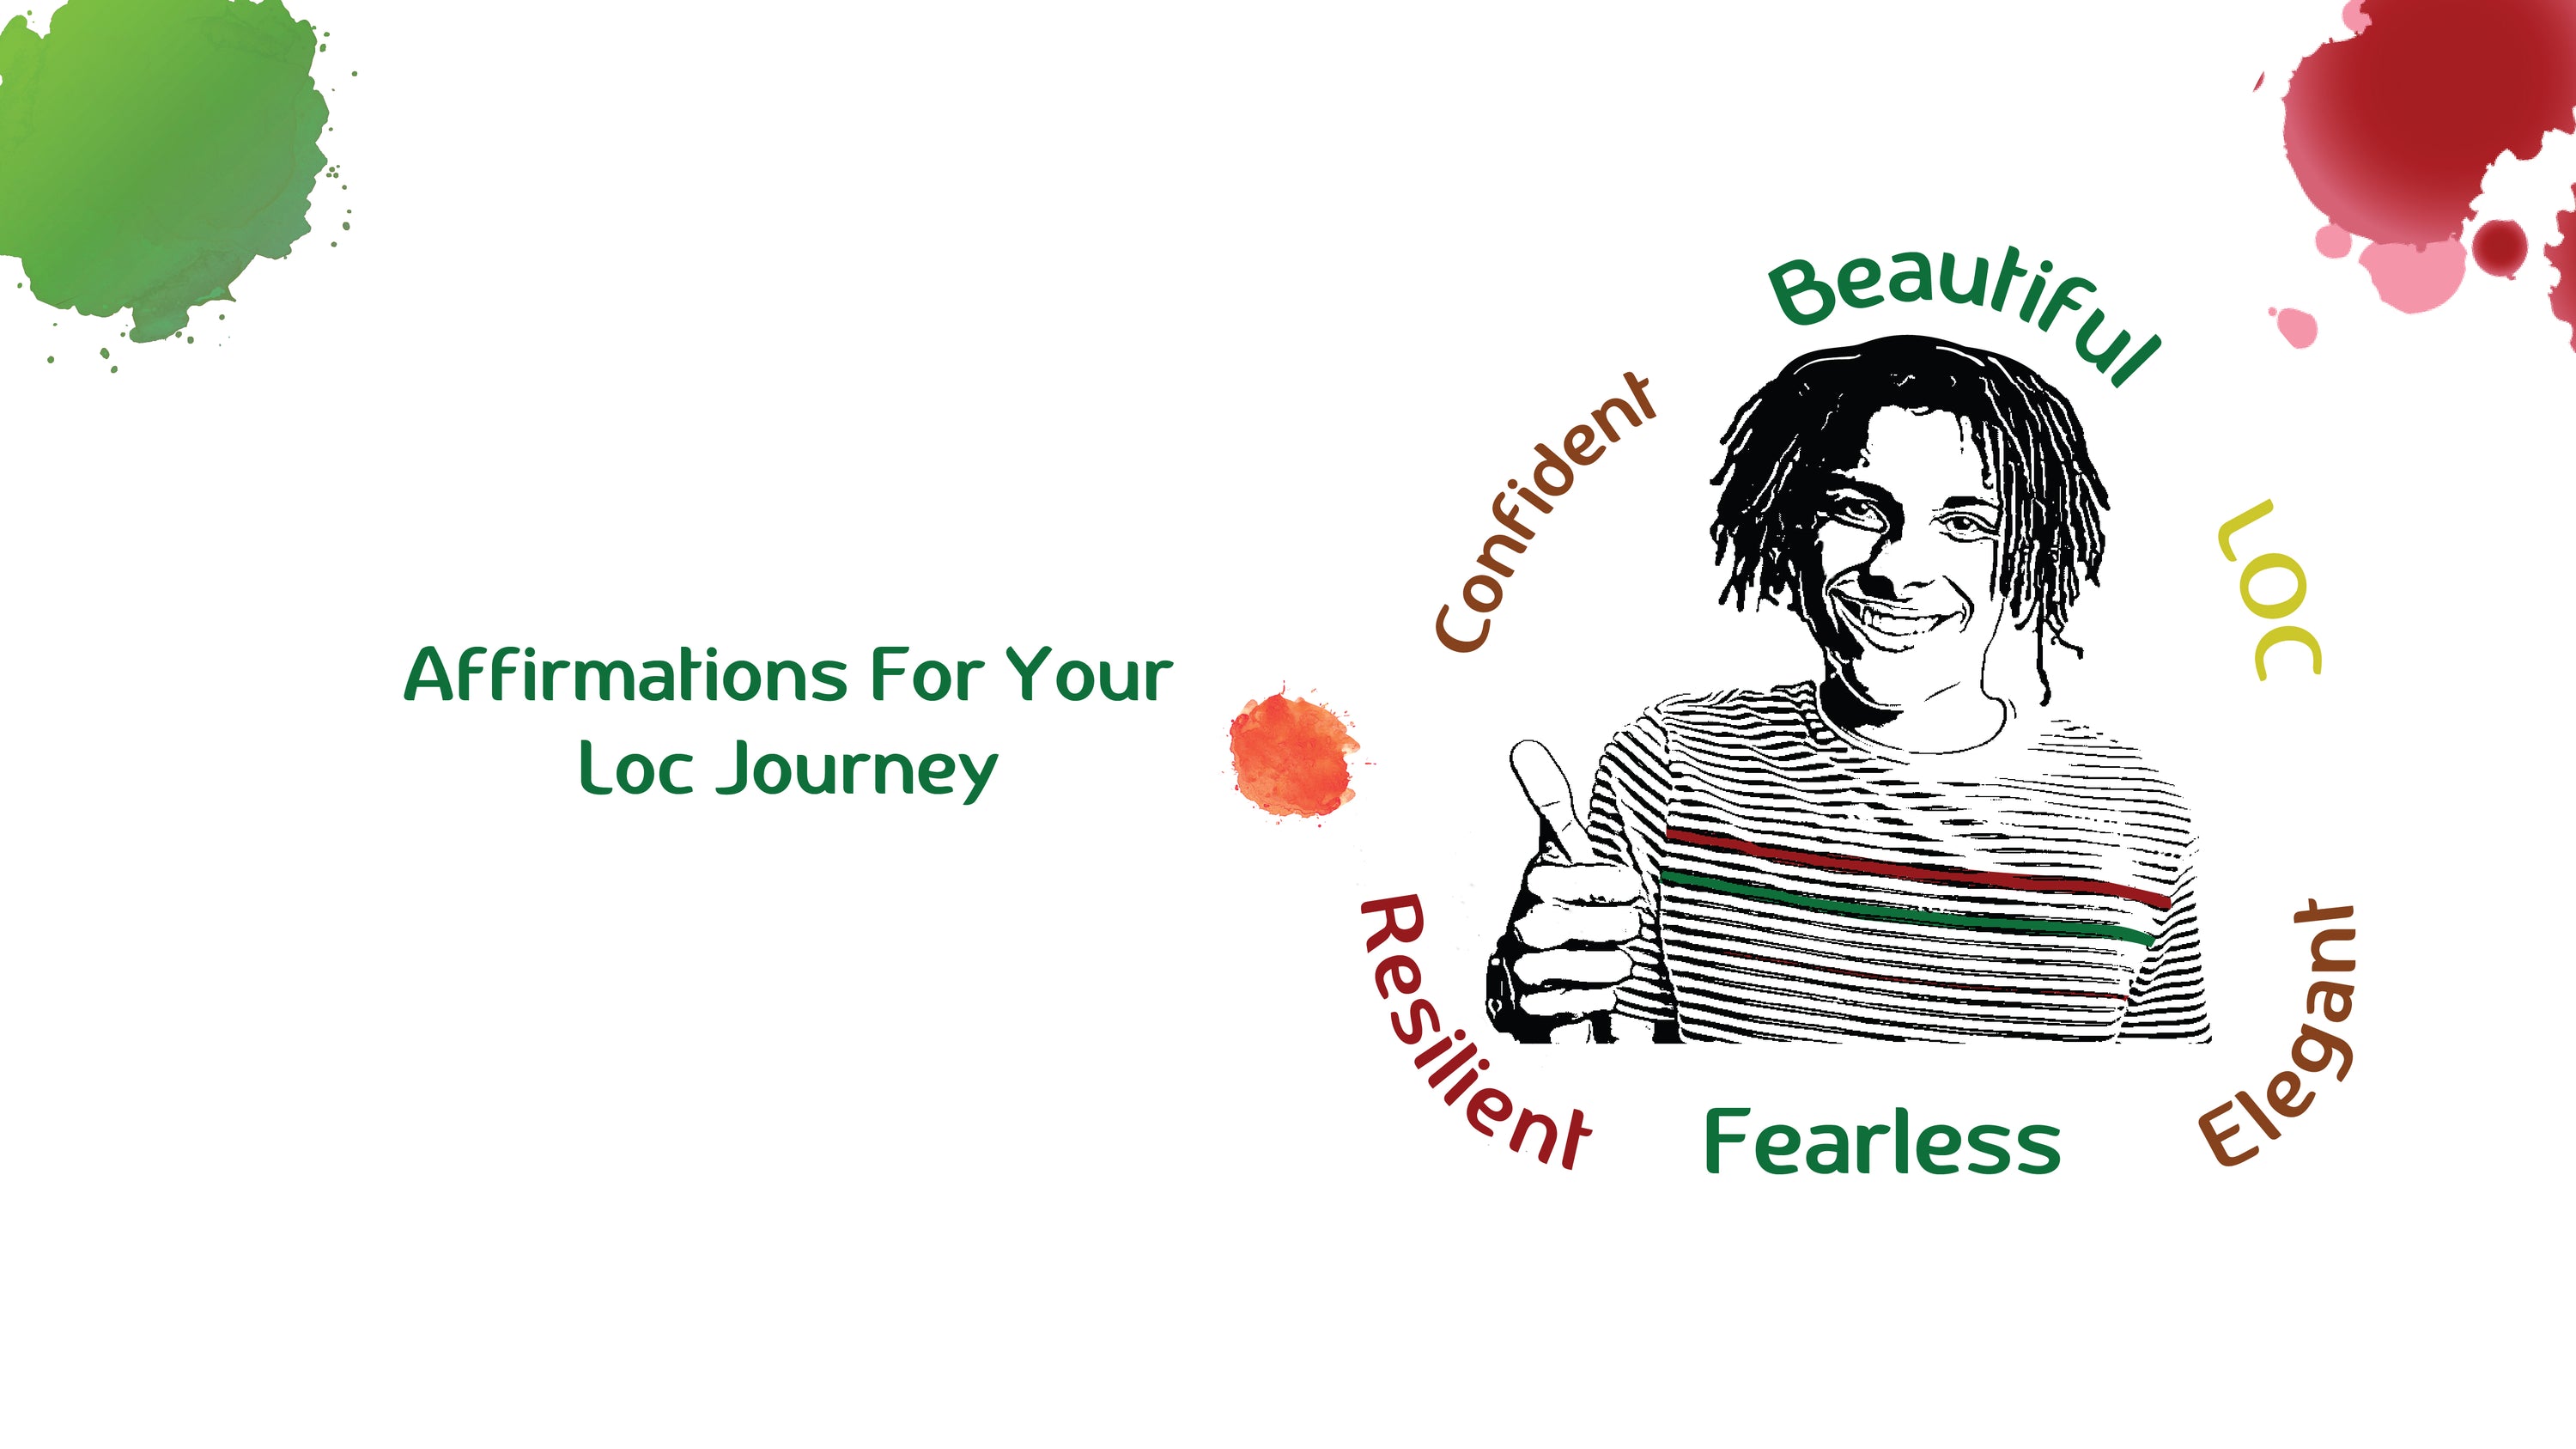 Affirmations For Your Loc Journey